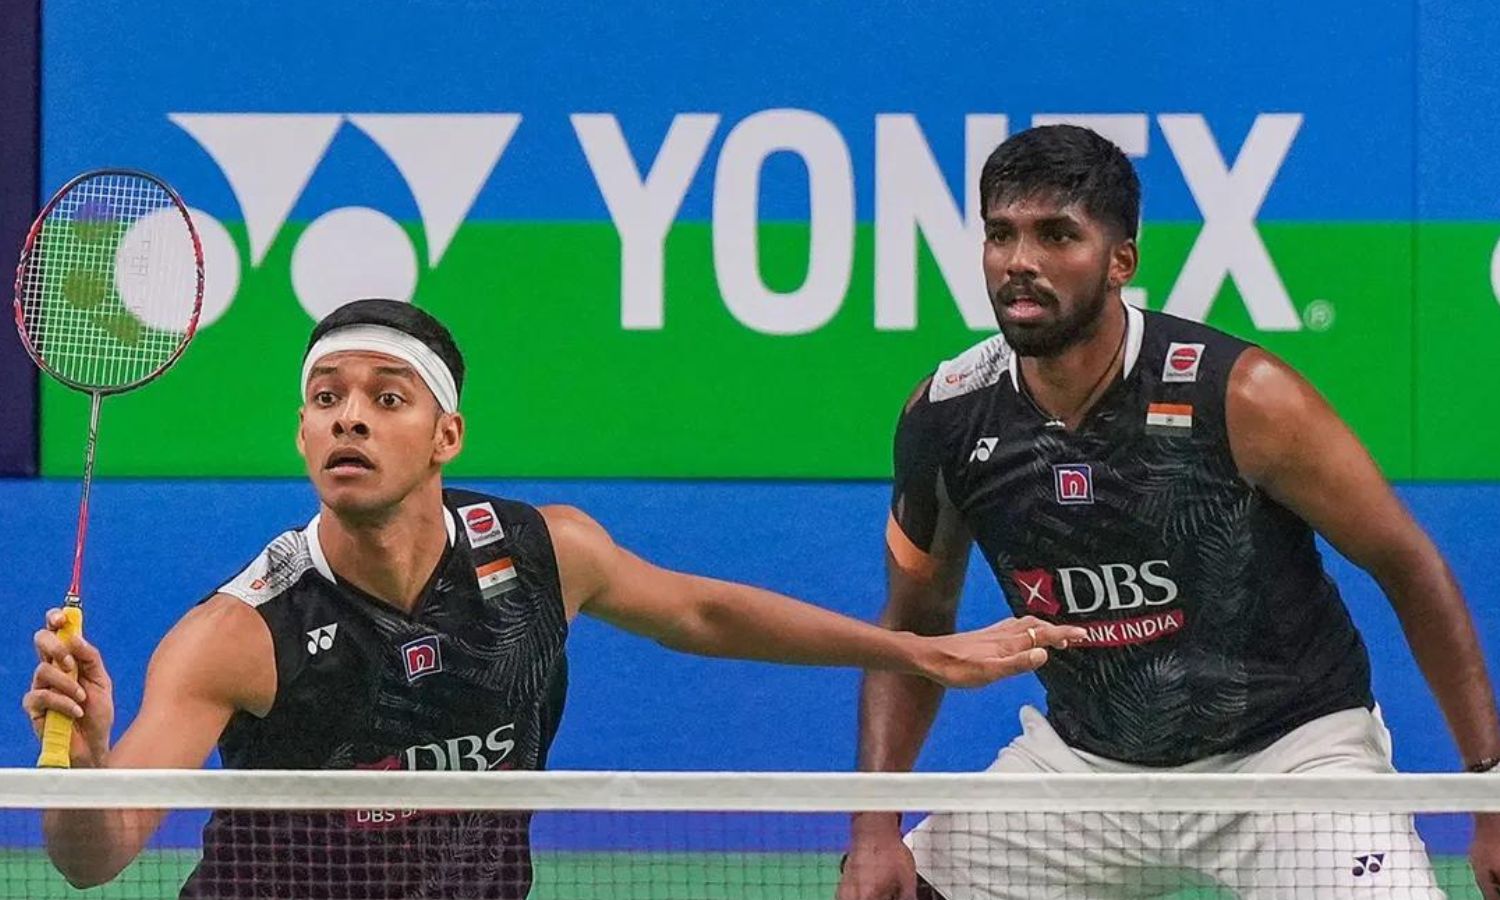 Satwik-Chirag ousted in first round by unseeded Daniel-Mads